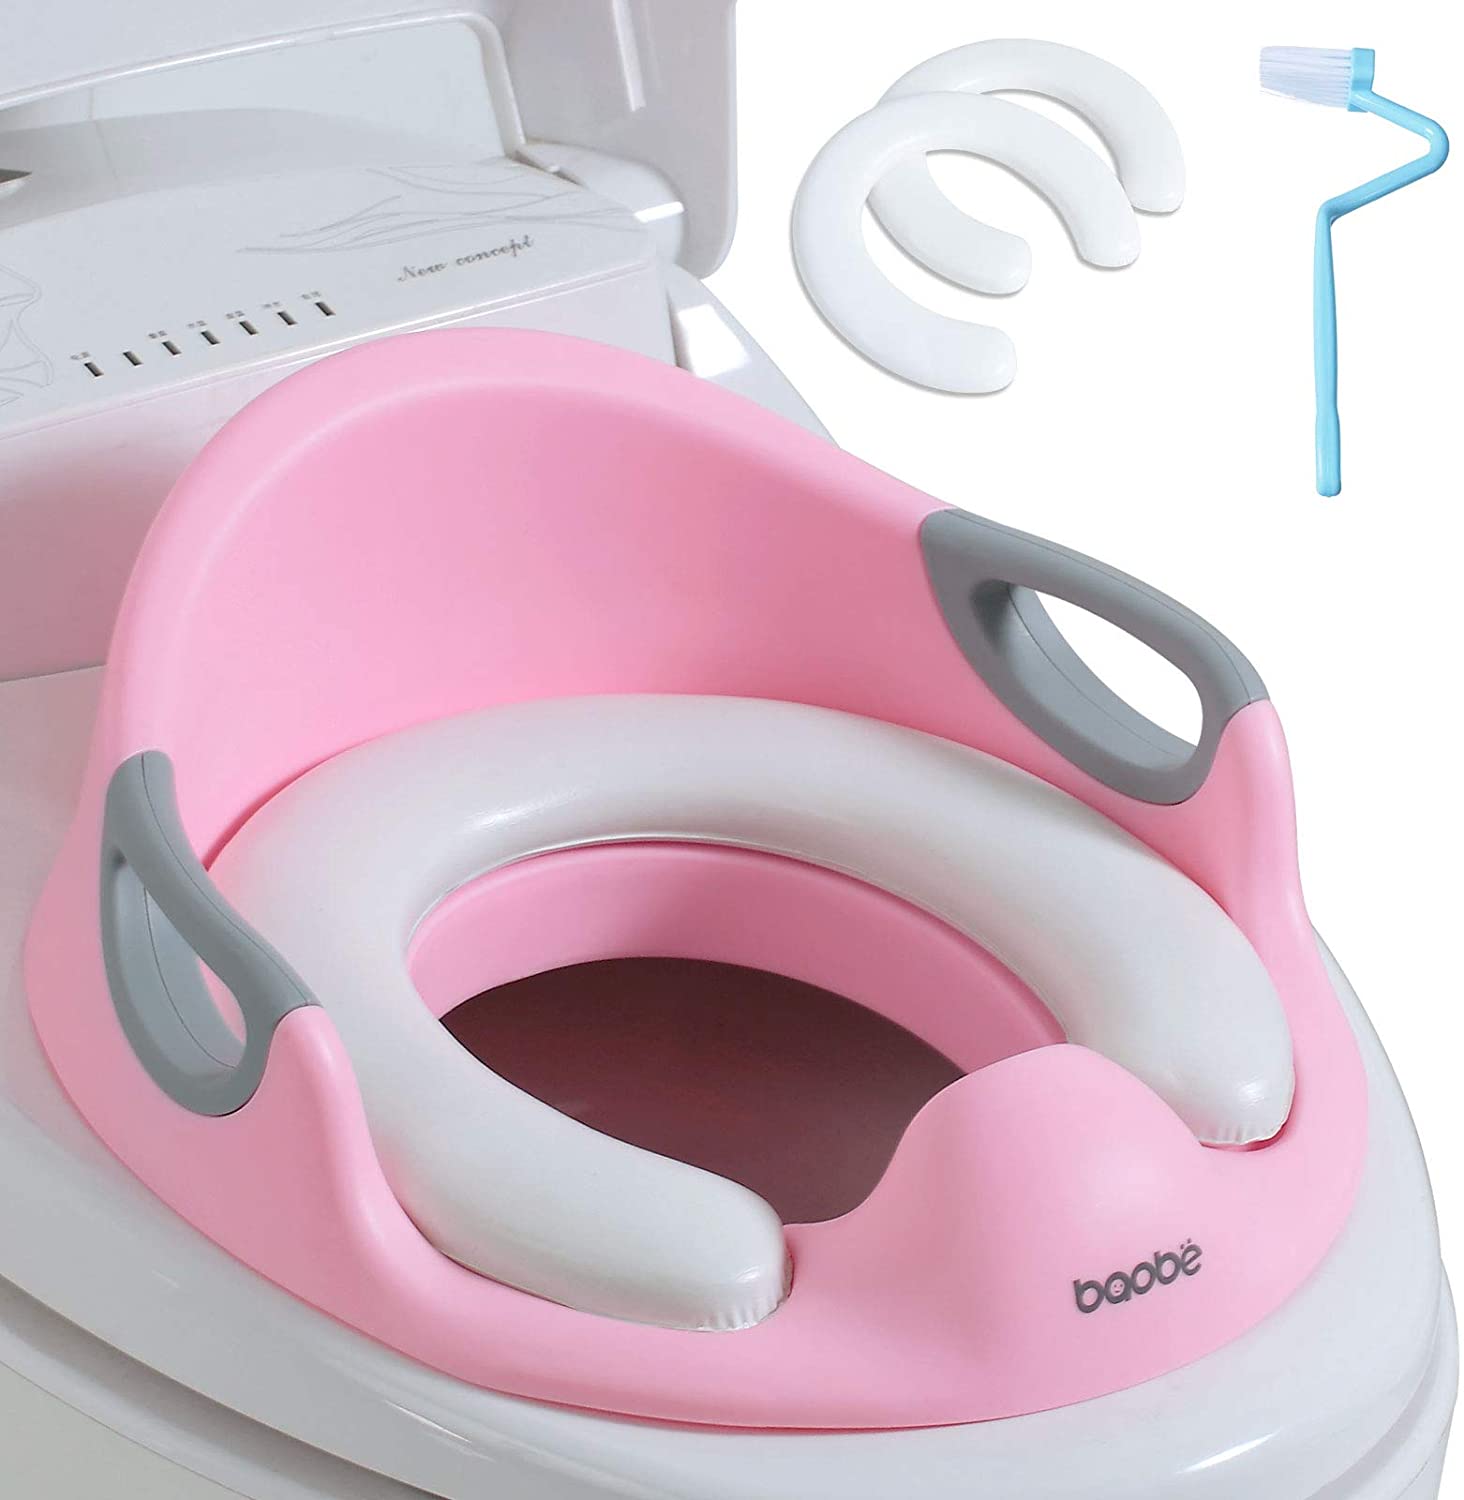 Factory Free sample Baby Feeding Products - Potty Training Seat for Kids Toddlers, Toilet Seat for Baby with Cushion Handle and Backrest, Toilet Trainer for Round and Oval Toilets (Pink) – E...